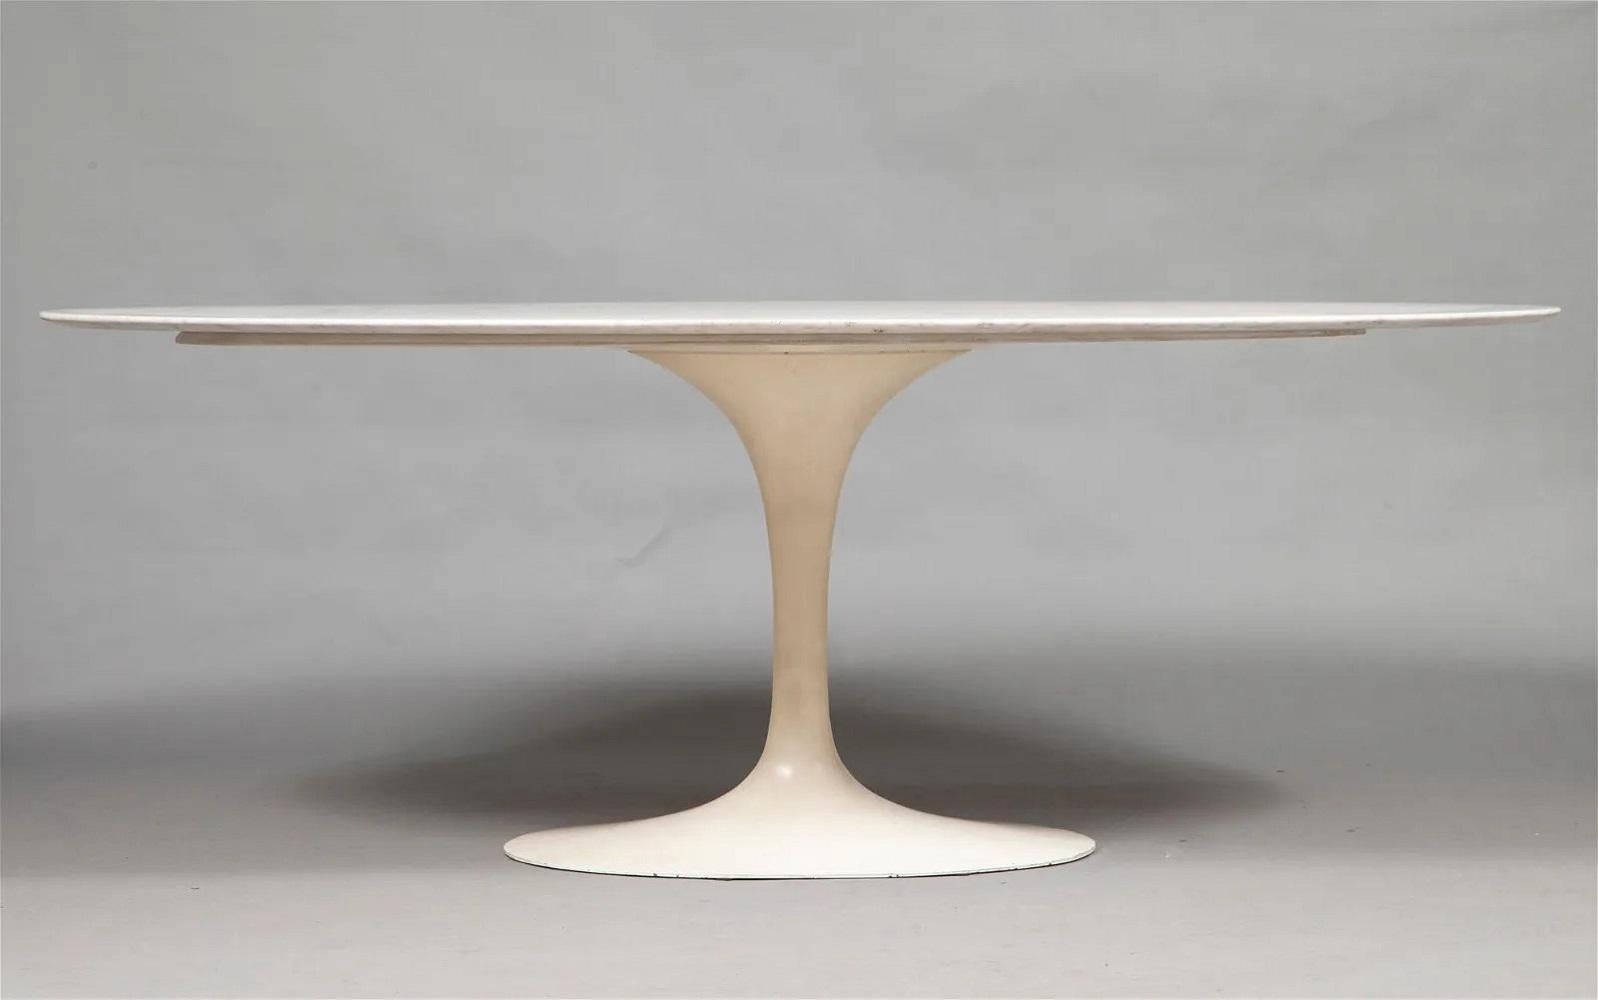 1960's Eero Saarinen Oval Marble Top Dining Table for Knoll. Tulip style base is enameled aluminum.